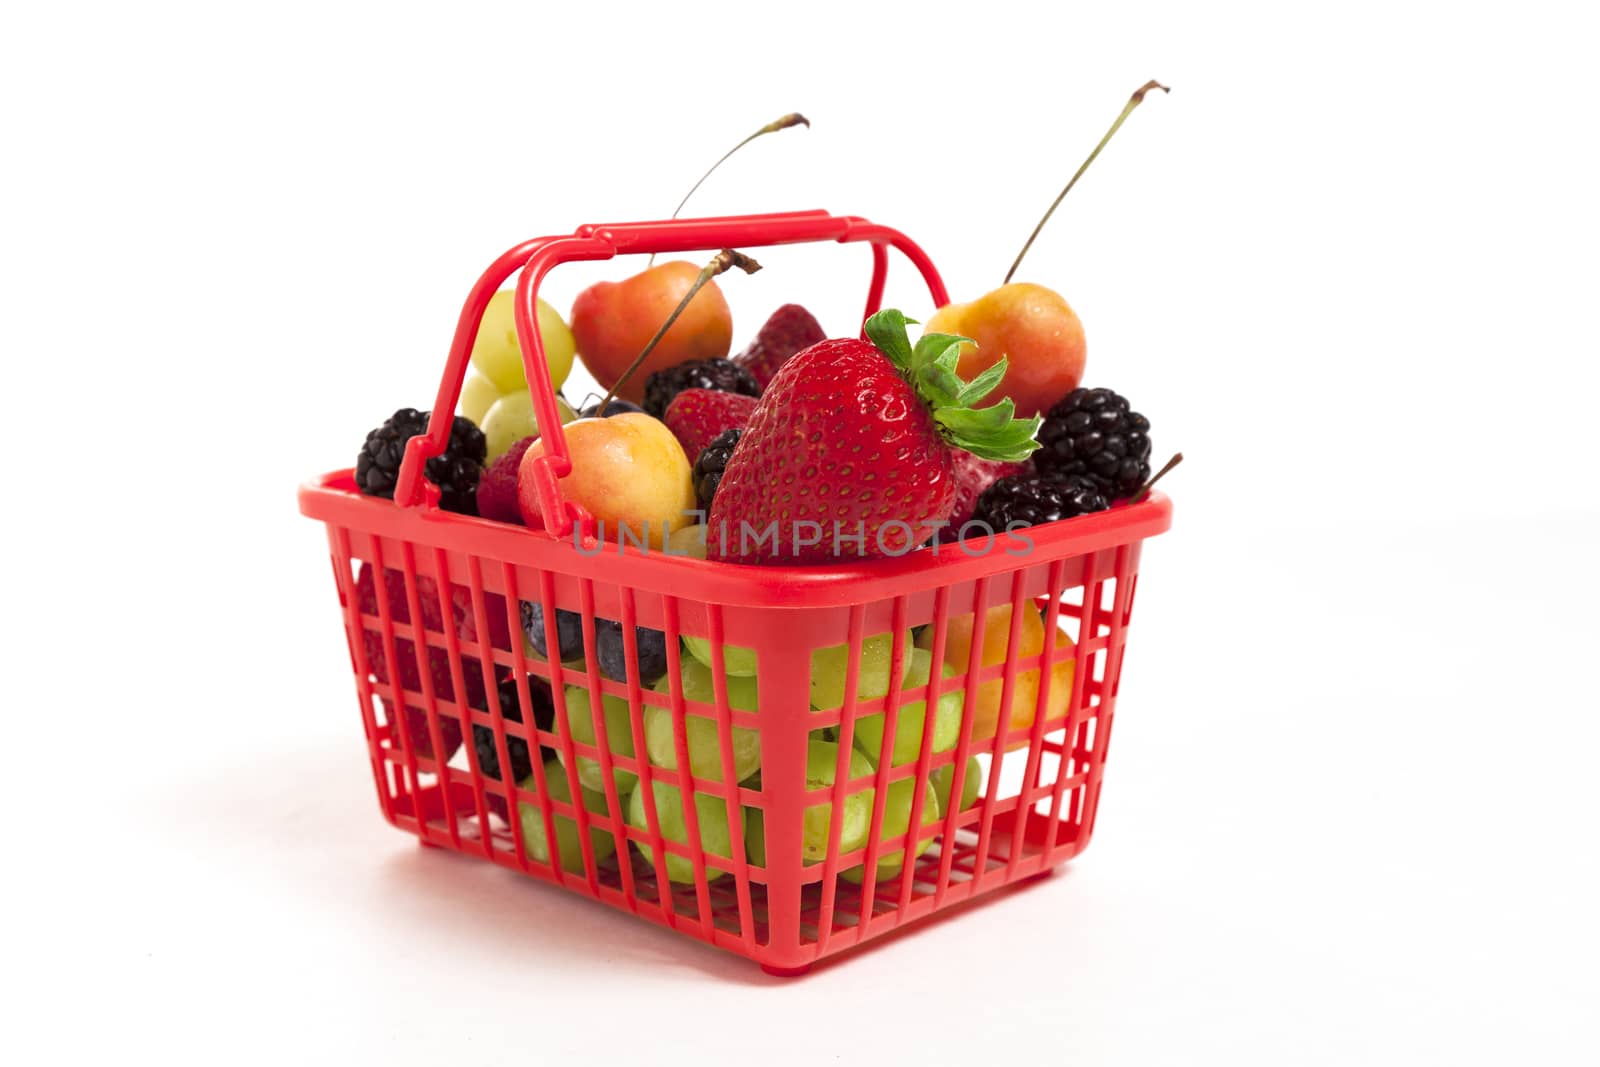 A red shopping basket full of oversized fruits and berries.